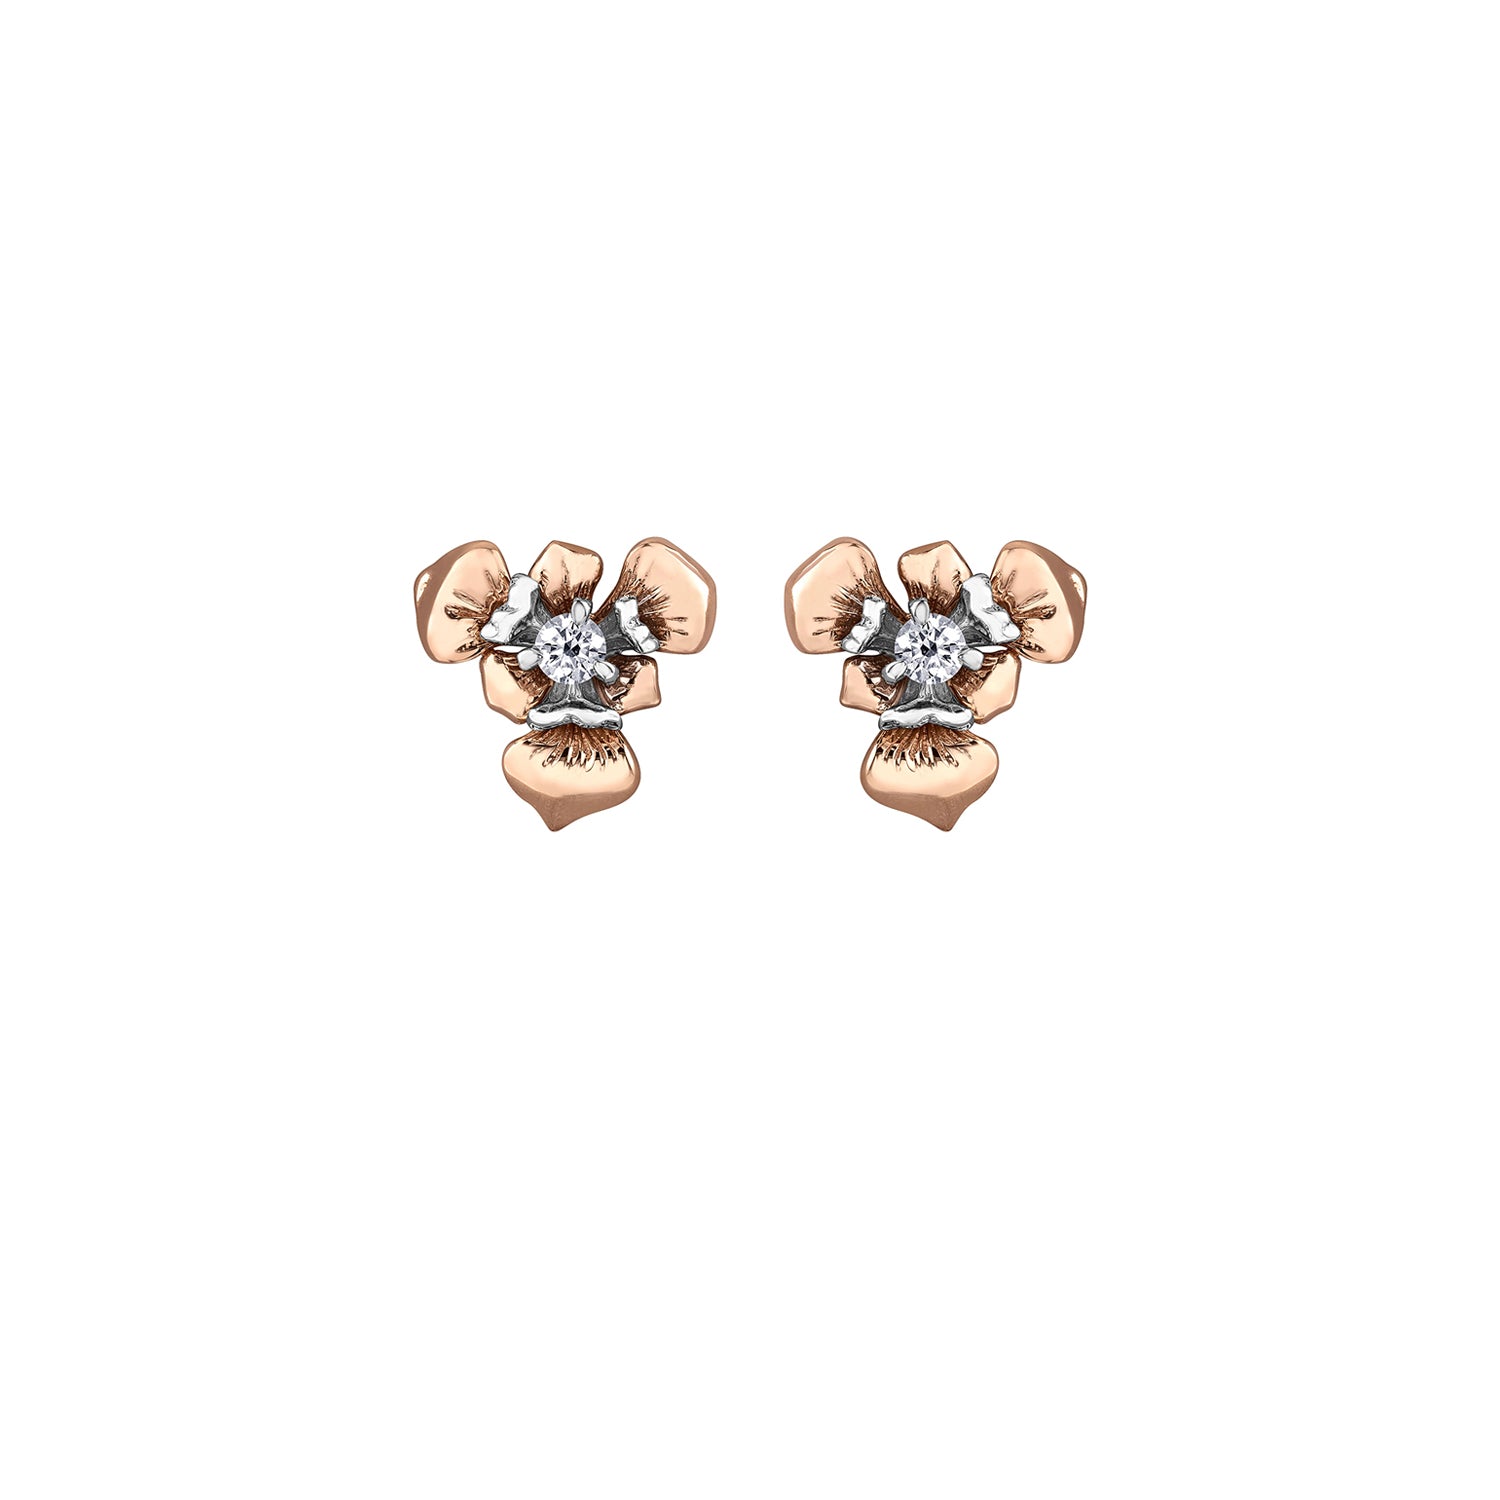 Crafted in 14KT rose and white Certified Canadian Gold, these earrings features Quebec blue flag iris flowers set with round brilliant-cut Canadian diamonds